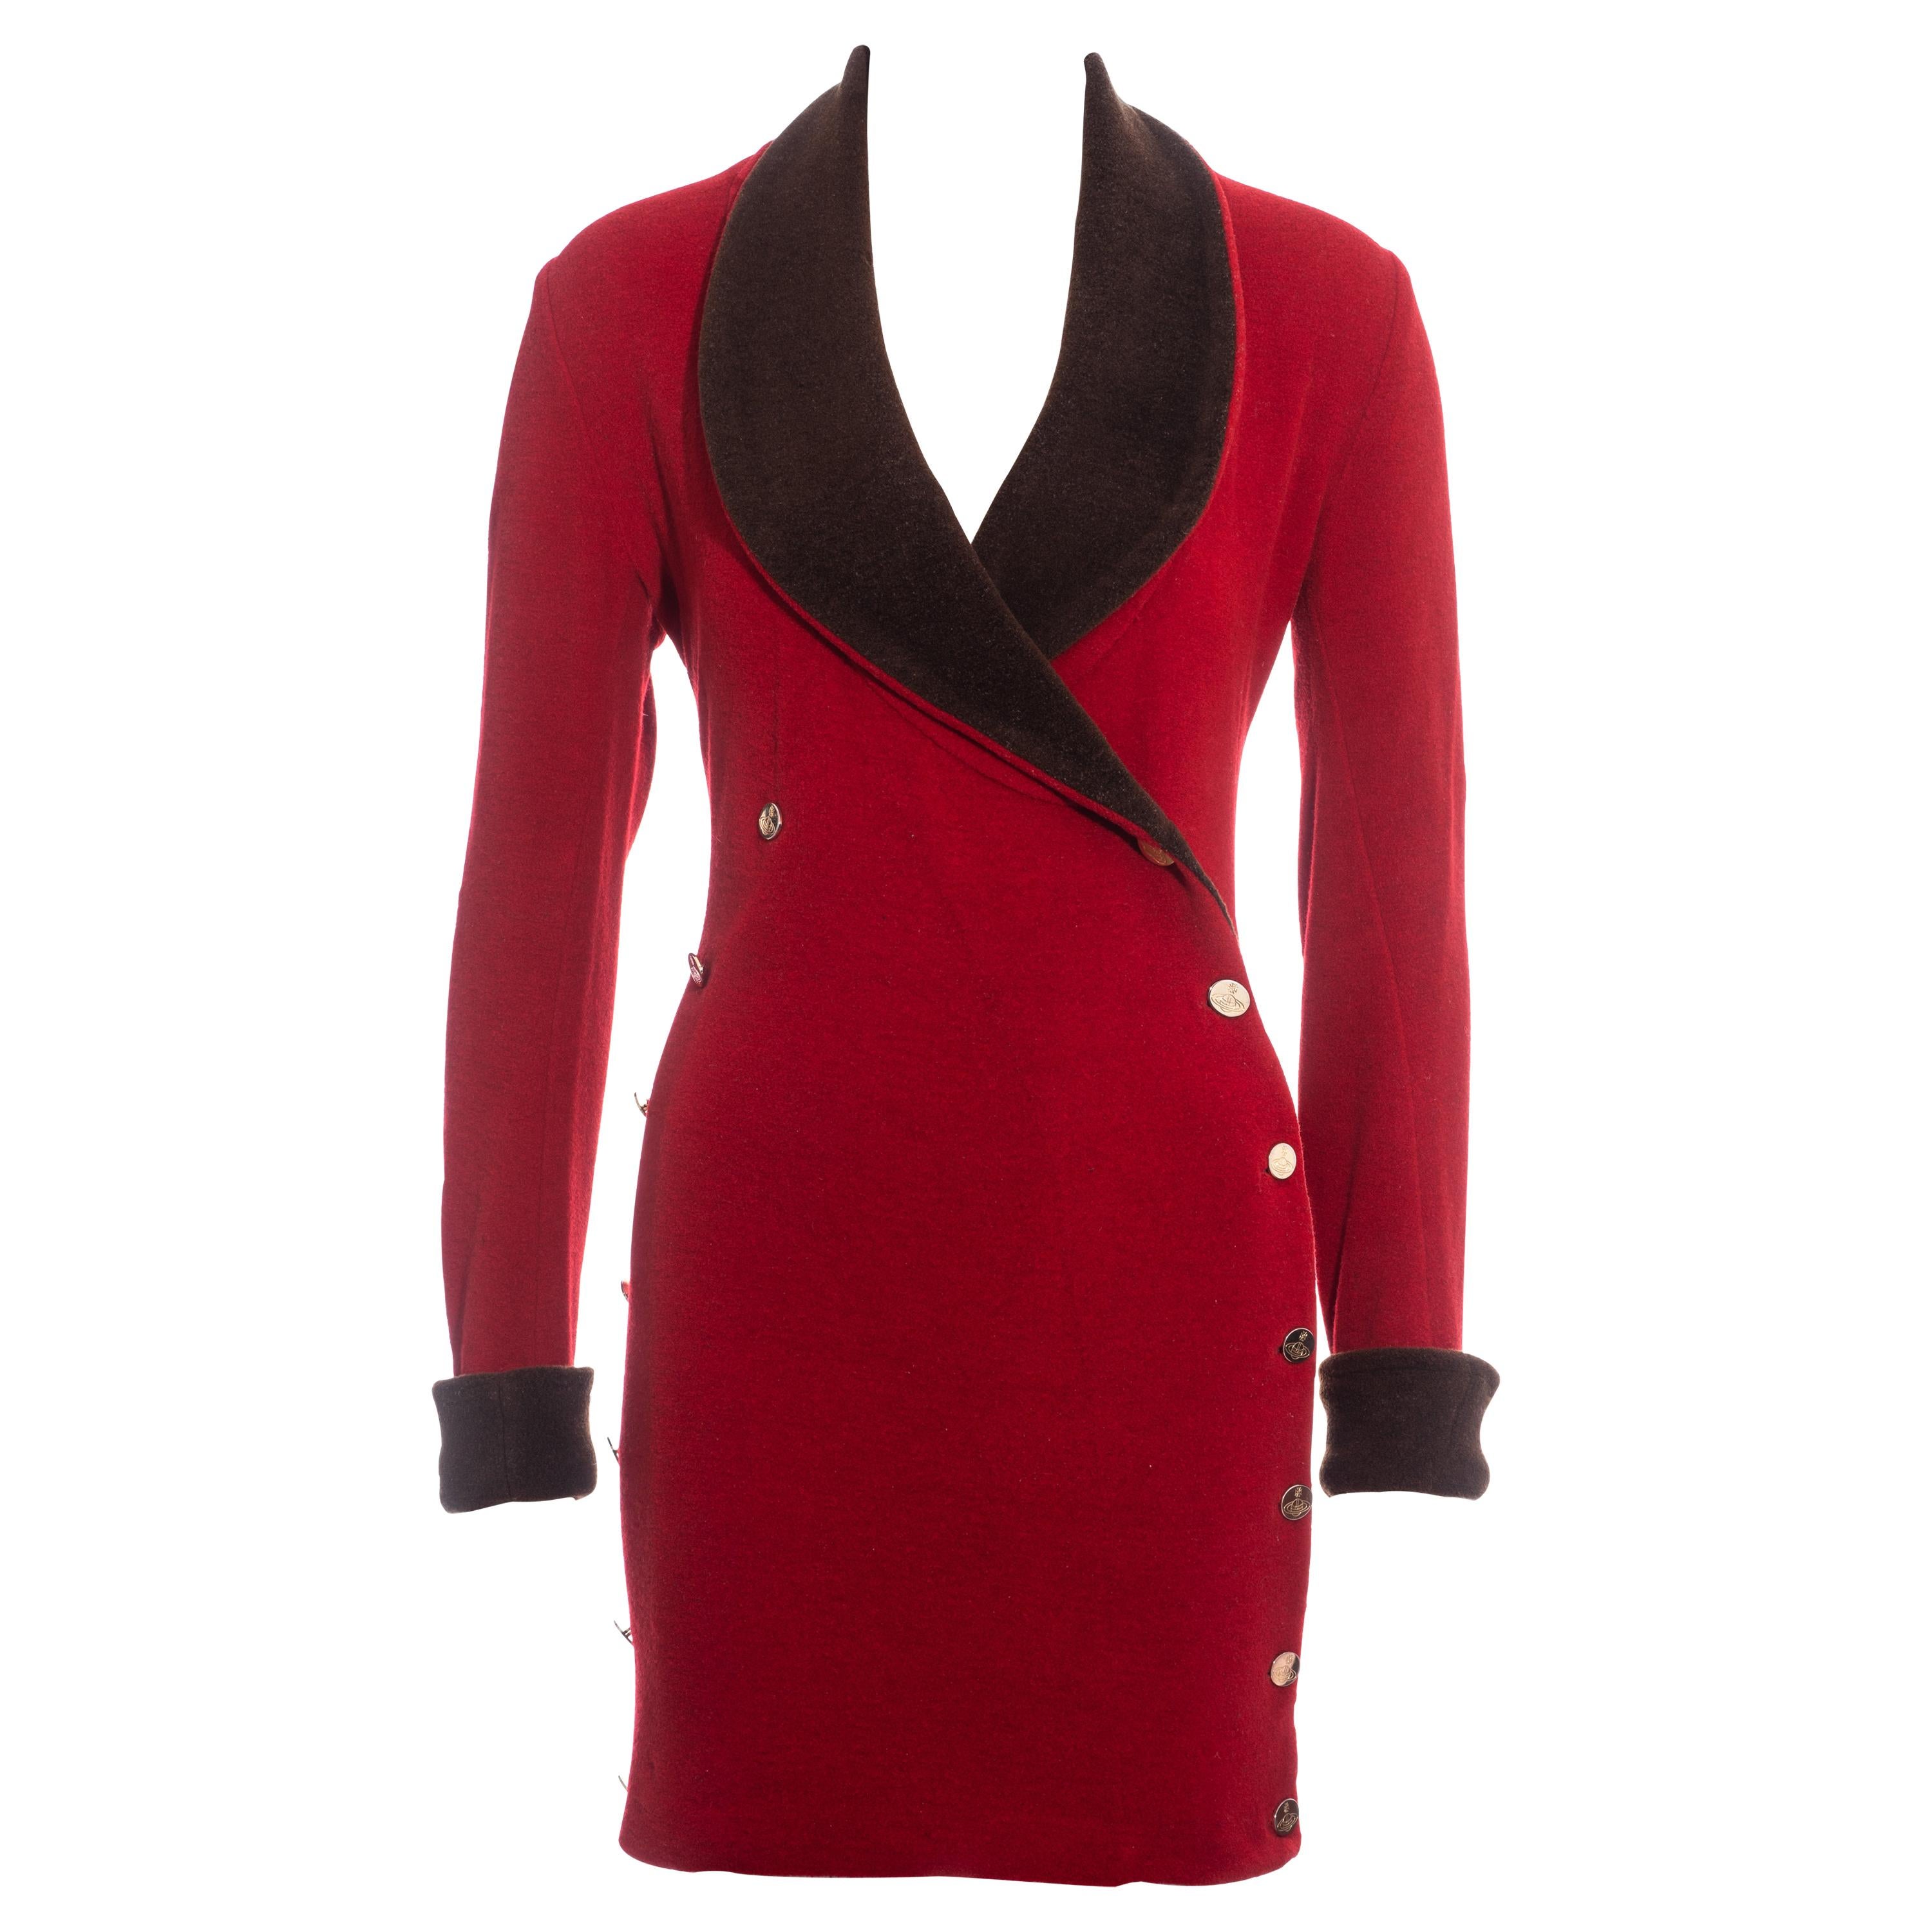 Vivienne Westwood red wool double-breasted blazer dress, fw 1989  For Sale